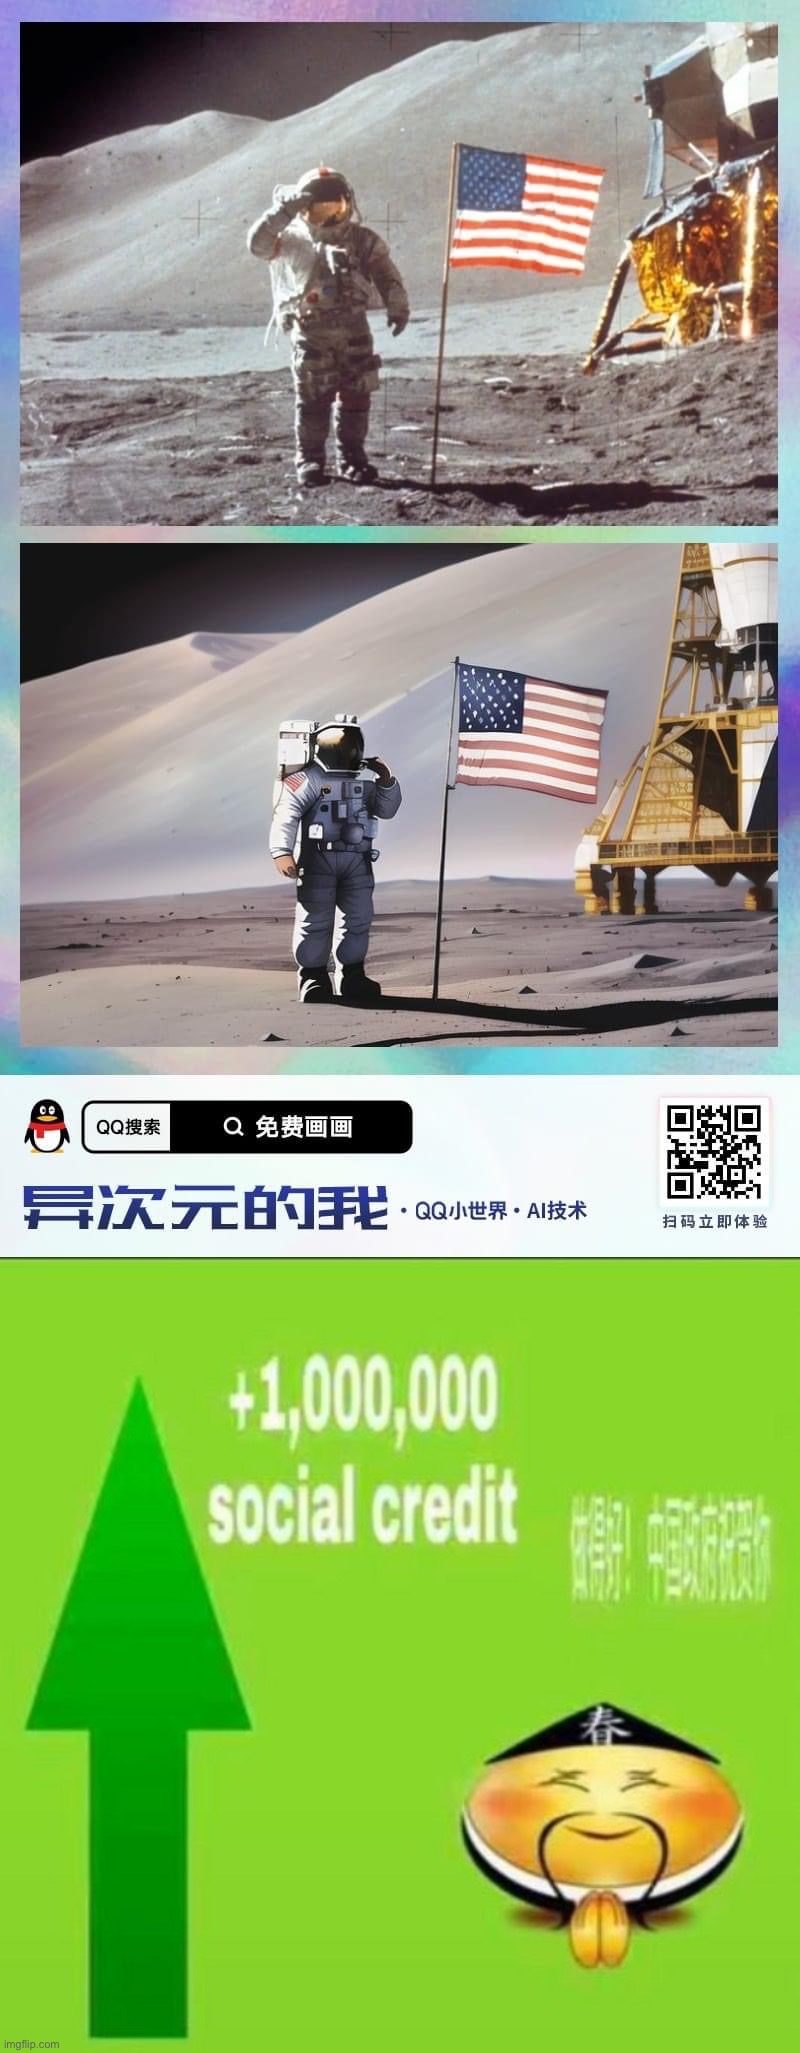 NASA moon landing is fake hoax. Bright moon-future belong with glory of China ofc. #debunked #Freedomphobia | image tagged in moon landing anime,1000000 social credit,nasa hoax,nasa lies,social credit,debunked | made w/ Imgflip meme maker